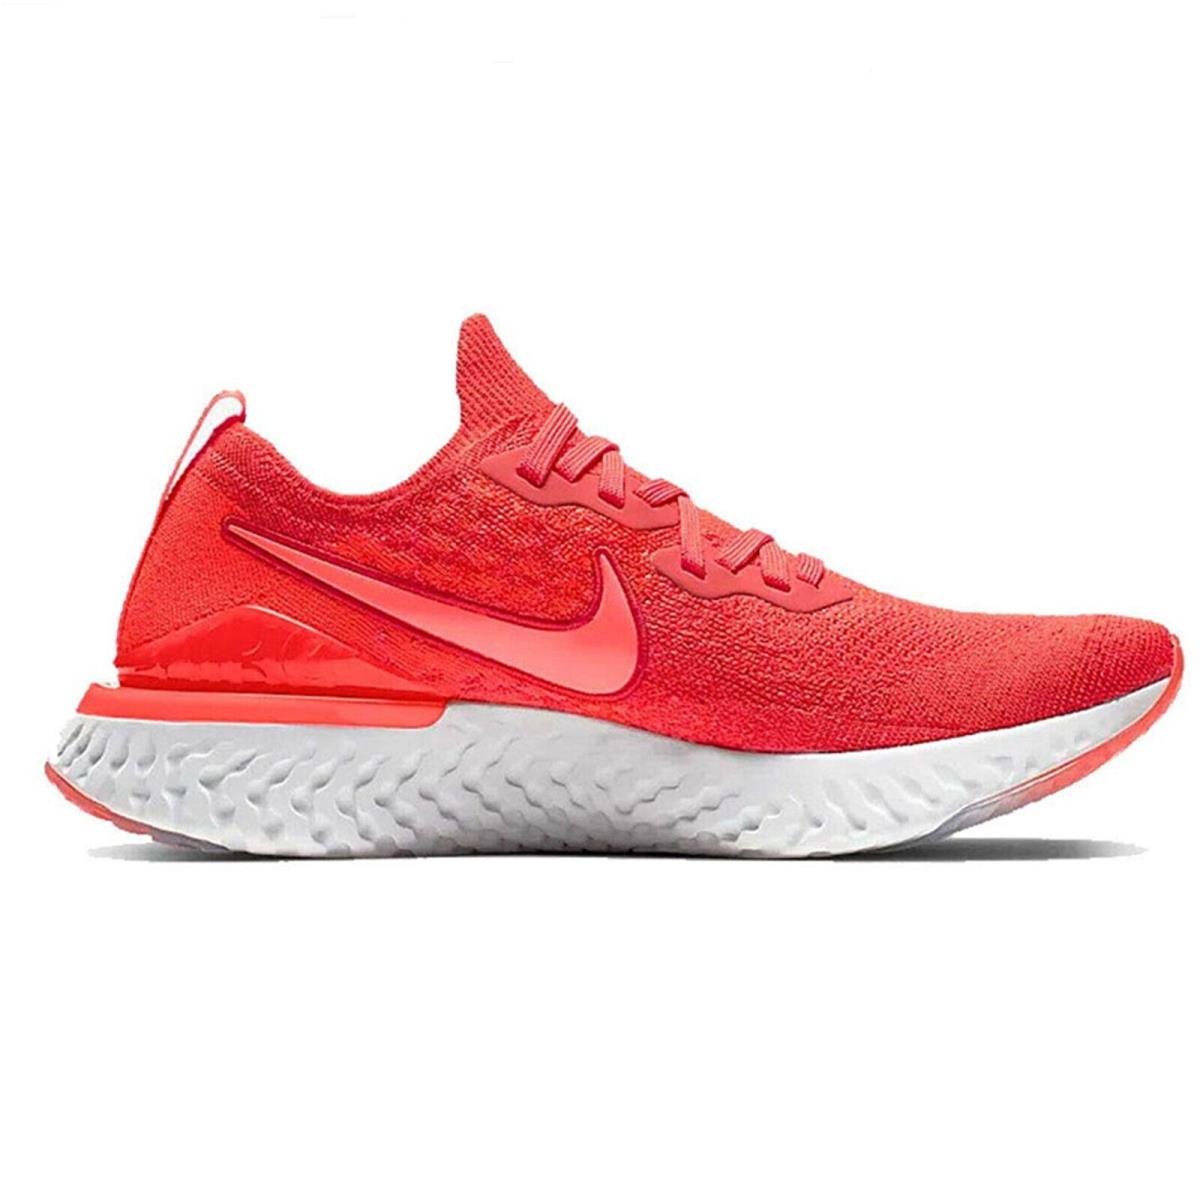 Nike shoes Epic React Flyknit - CHILI RED / BRIGHT CRIMSON , CHILI RED / BRIGHT CRIMSON Manufacturer 1